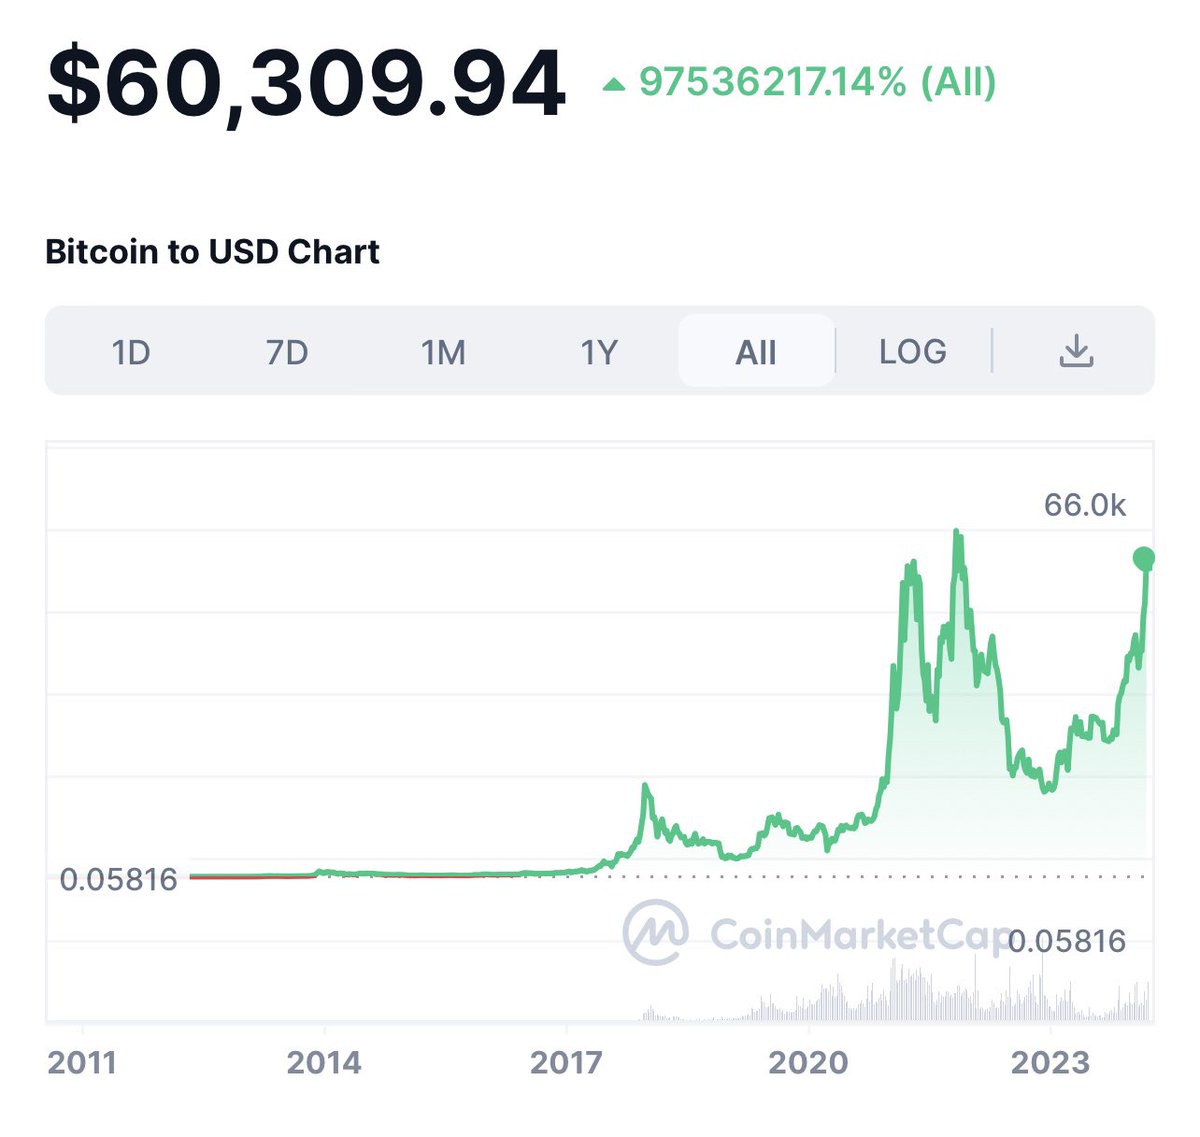 BTC >$60K for first time in more than 2 years and next halving coming in April. A roller coaster ride for sure; but wow! Time to get a secure, safe AND simple self custody solution to store your crypto assets and manage your digital identity. Time to get a #keevowallet.